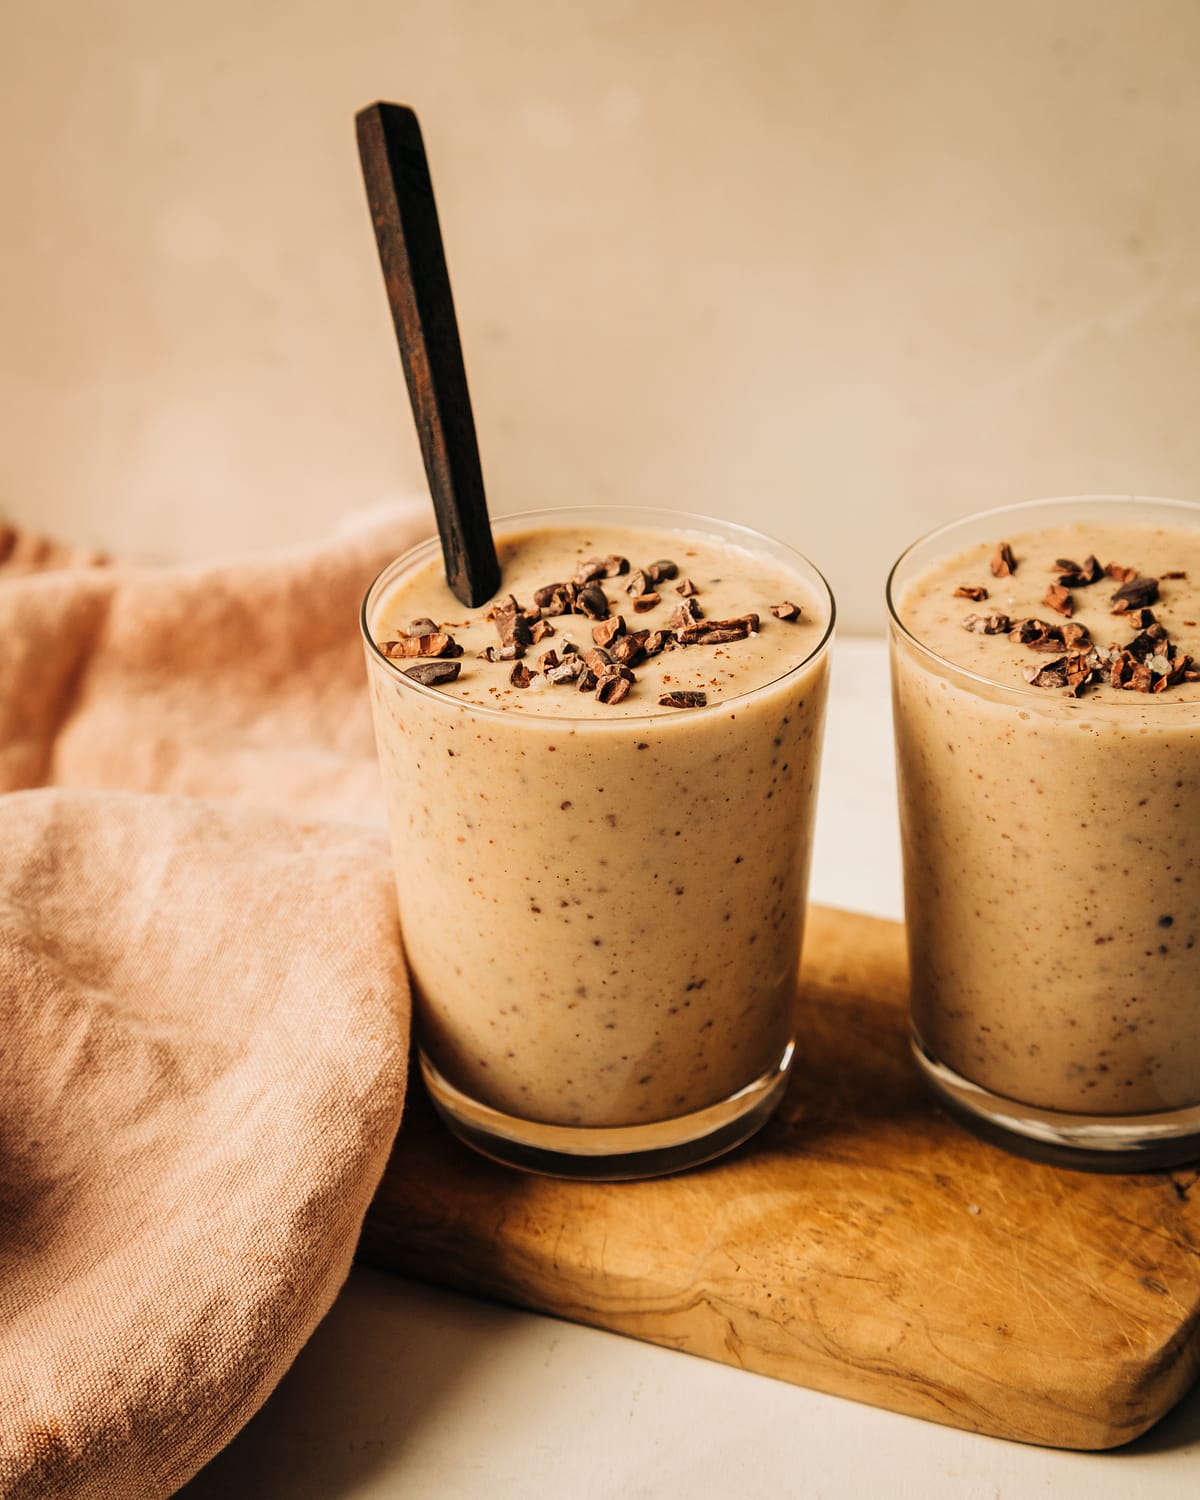 A head on shot of a creamy, beige vanilla chip smoothie in two clear glasses. The smoothie is garnished with cacao nibs and there is a dark wooden spoon sticking out of the one glass.